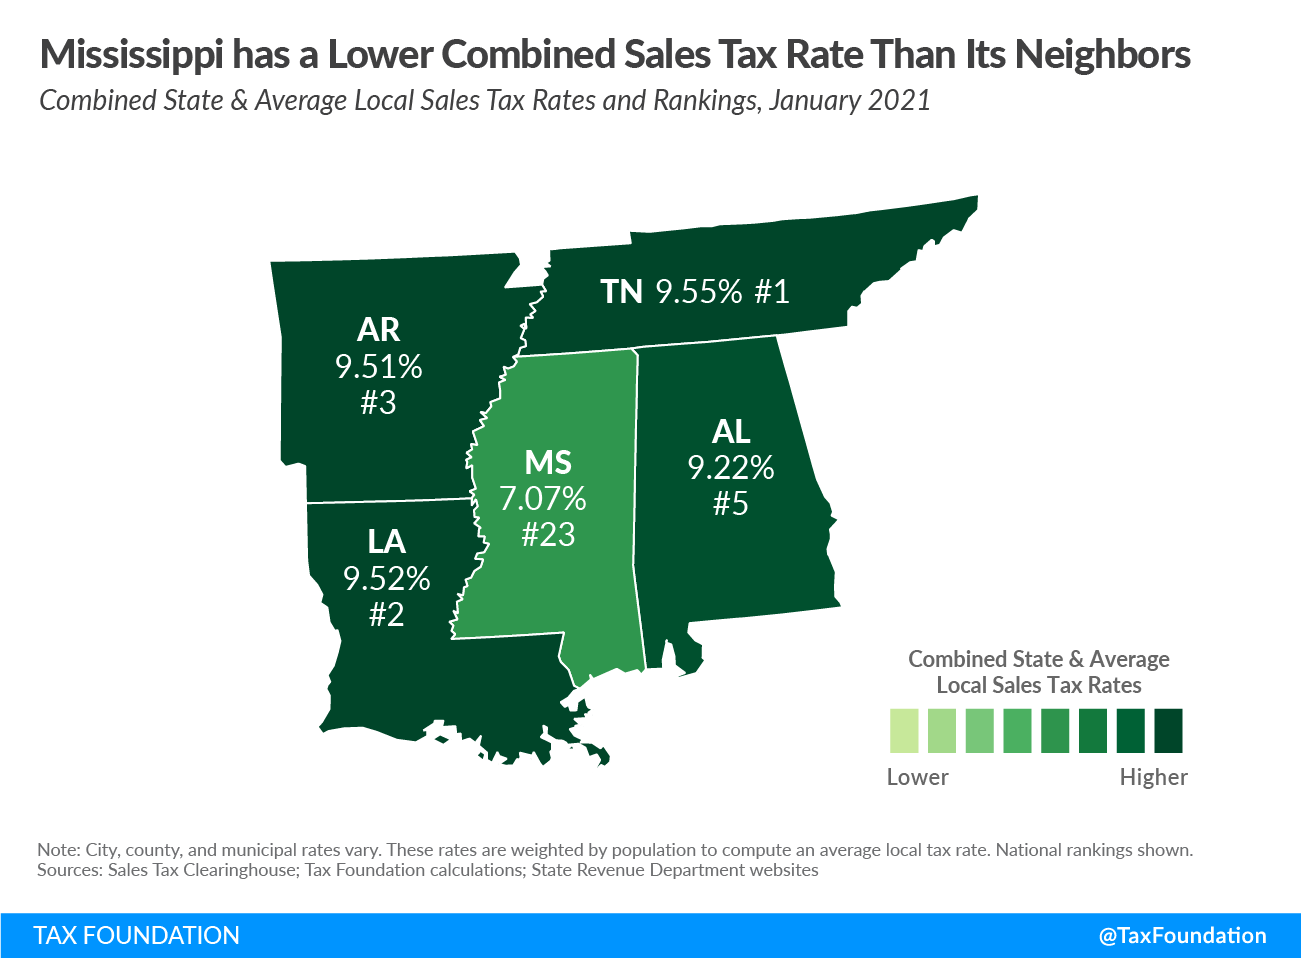 Mississippi sales tax rates compared regionally Mississippi income tax reform proposal to eliminate the income tax in Mississippi 2021 Mississippi income tax phaseout